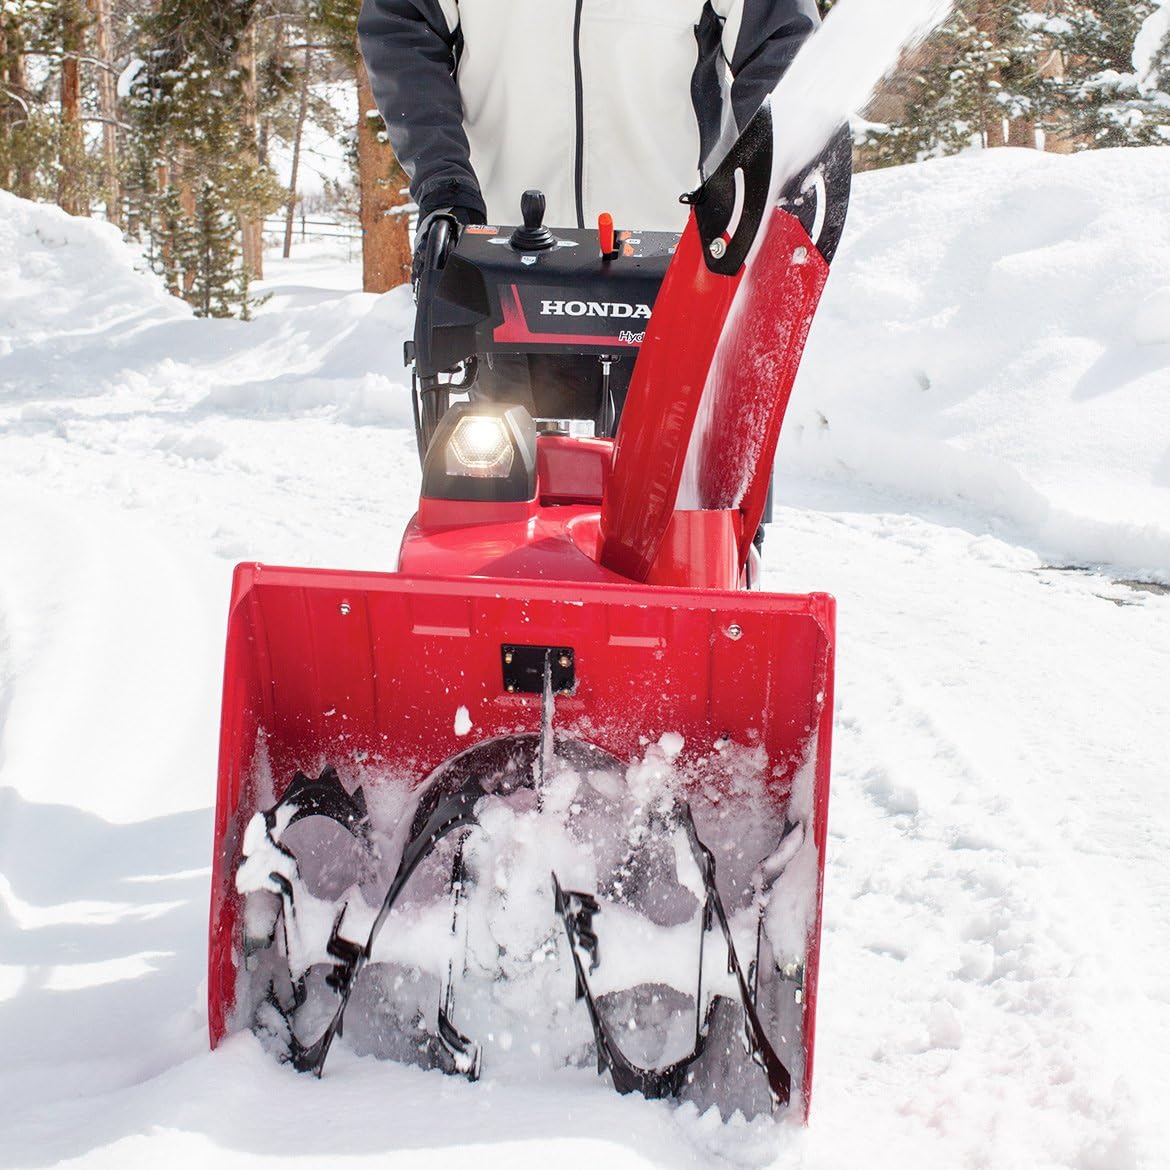 Honda HSS724AWD 198cc Two Stage Snow Blower Review